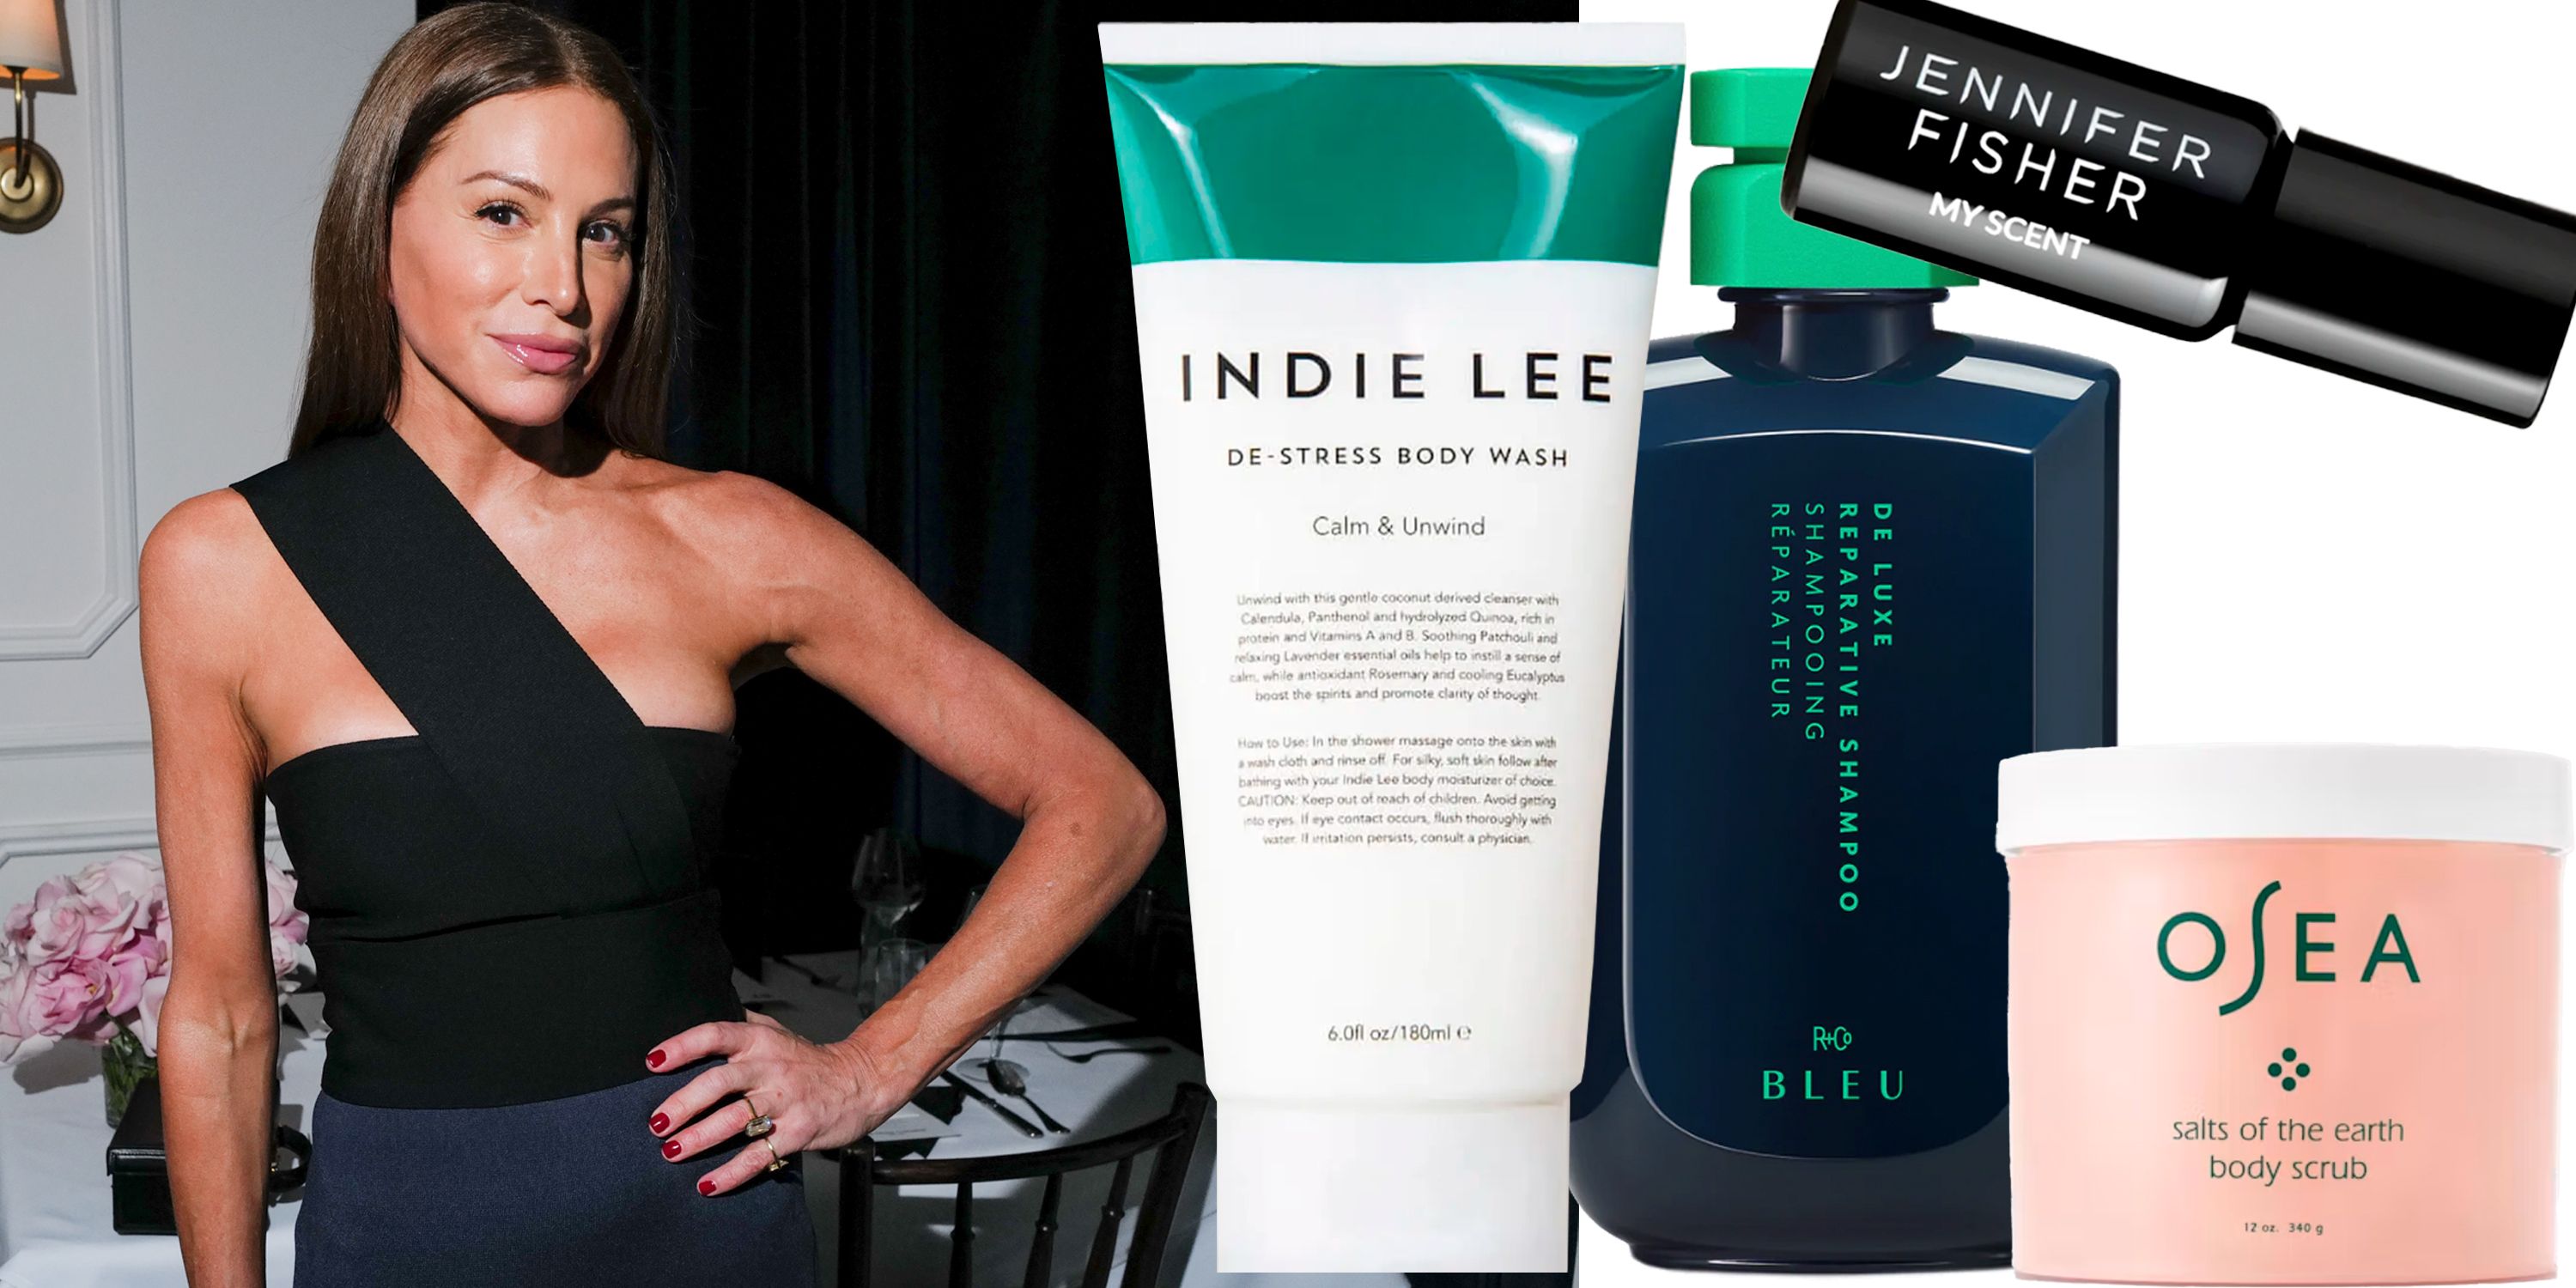 Take the Edge Off: Self-Care Essentials Jennifer Fisher Swears By